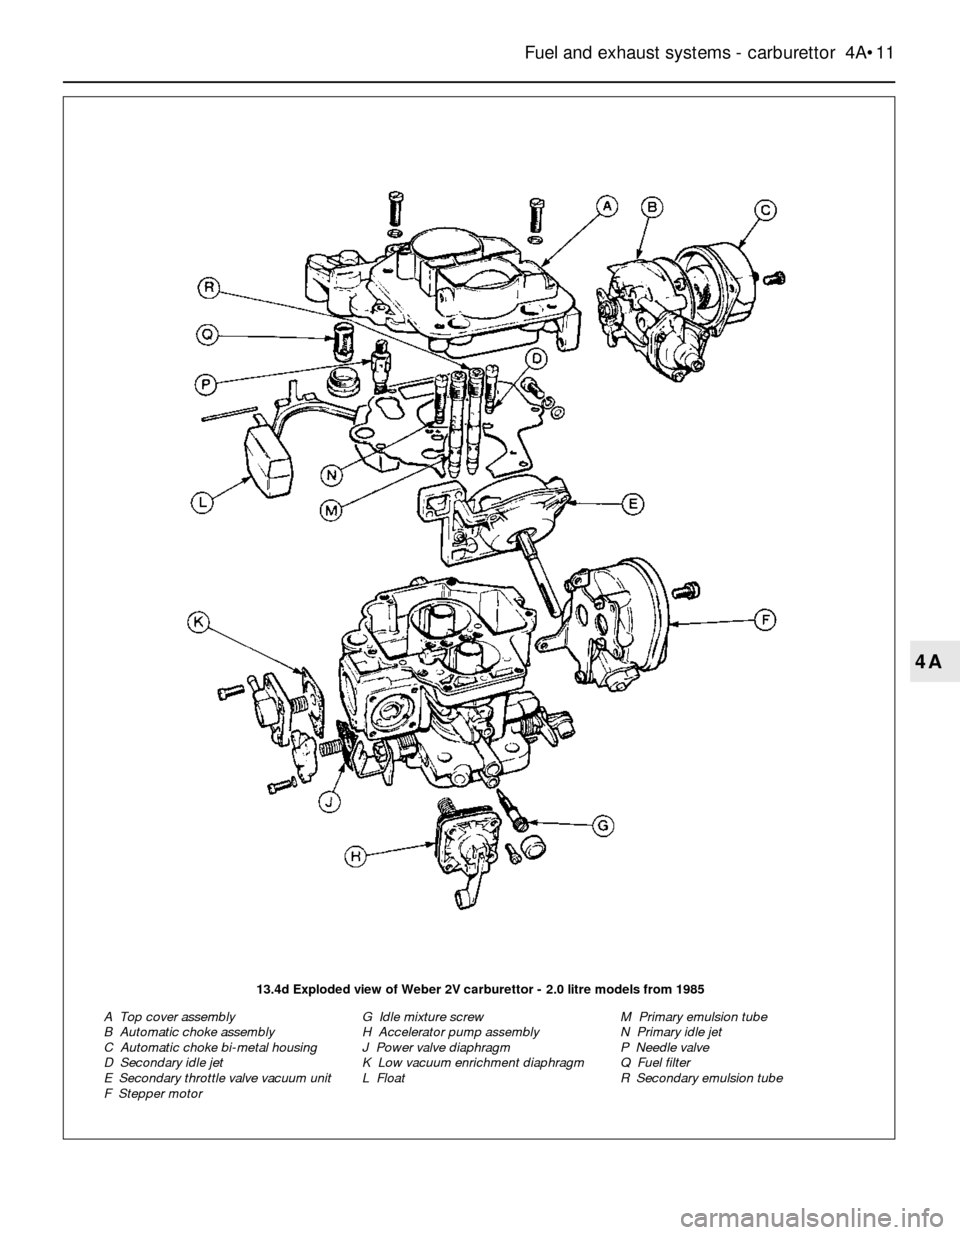 FORD SIERRA 1990 2.G Fuel And Exhaust Systems Carburettor Workshop Manual Fuel and exhaust systems - carburettor  4A•11
4A
13.4d Exploded view of Weber 2V carburettor - 2.0 litre models from 1985
A  Top cover assembly
B  Automatic choke assembly
C  Automatic choke bi-meta